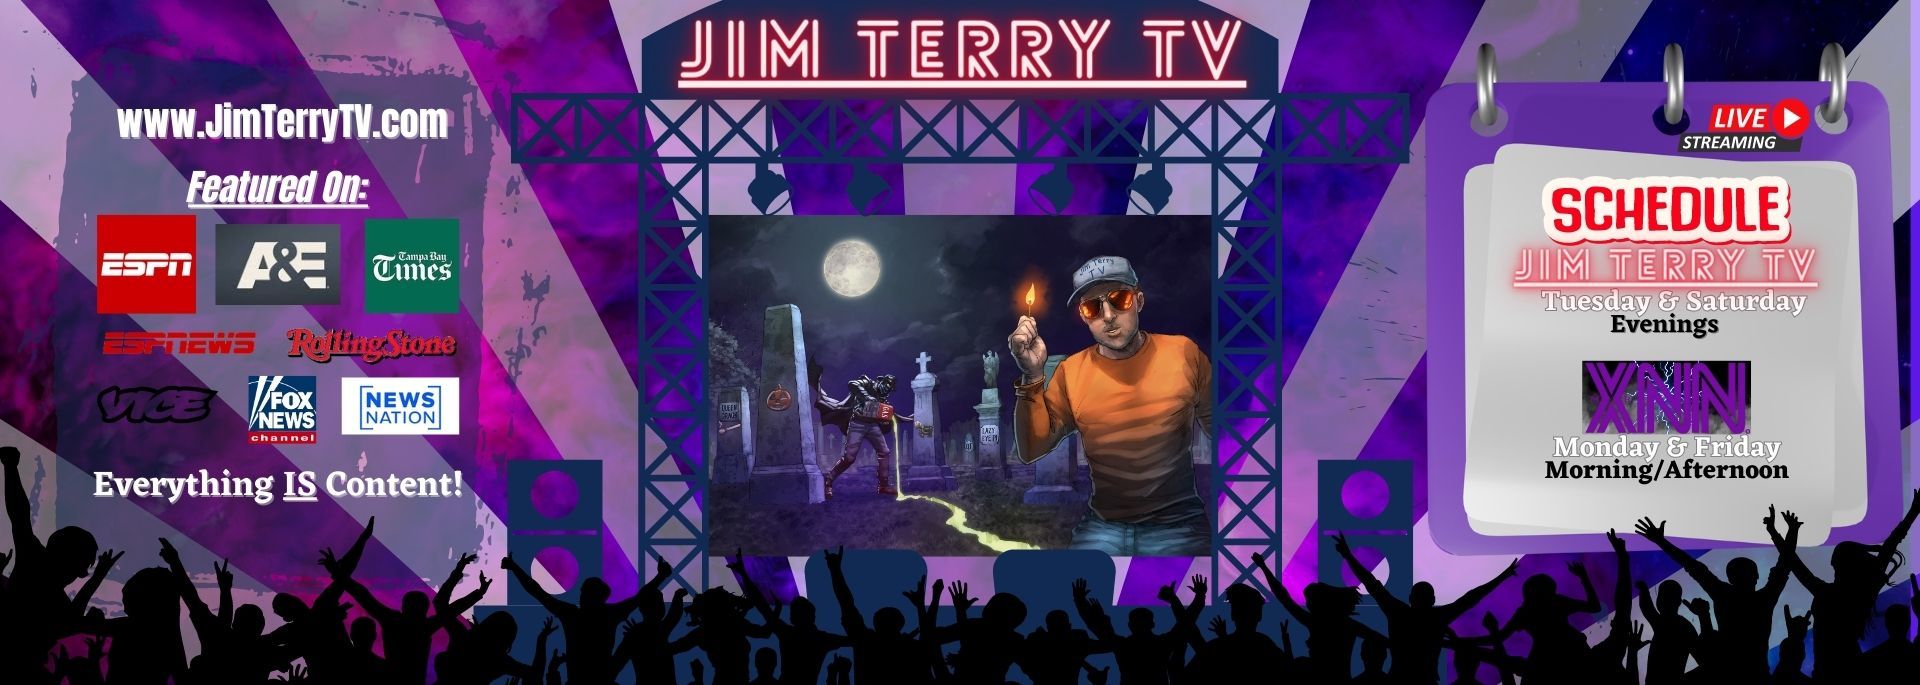 Jim Terry TV on YouTube channel